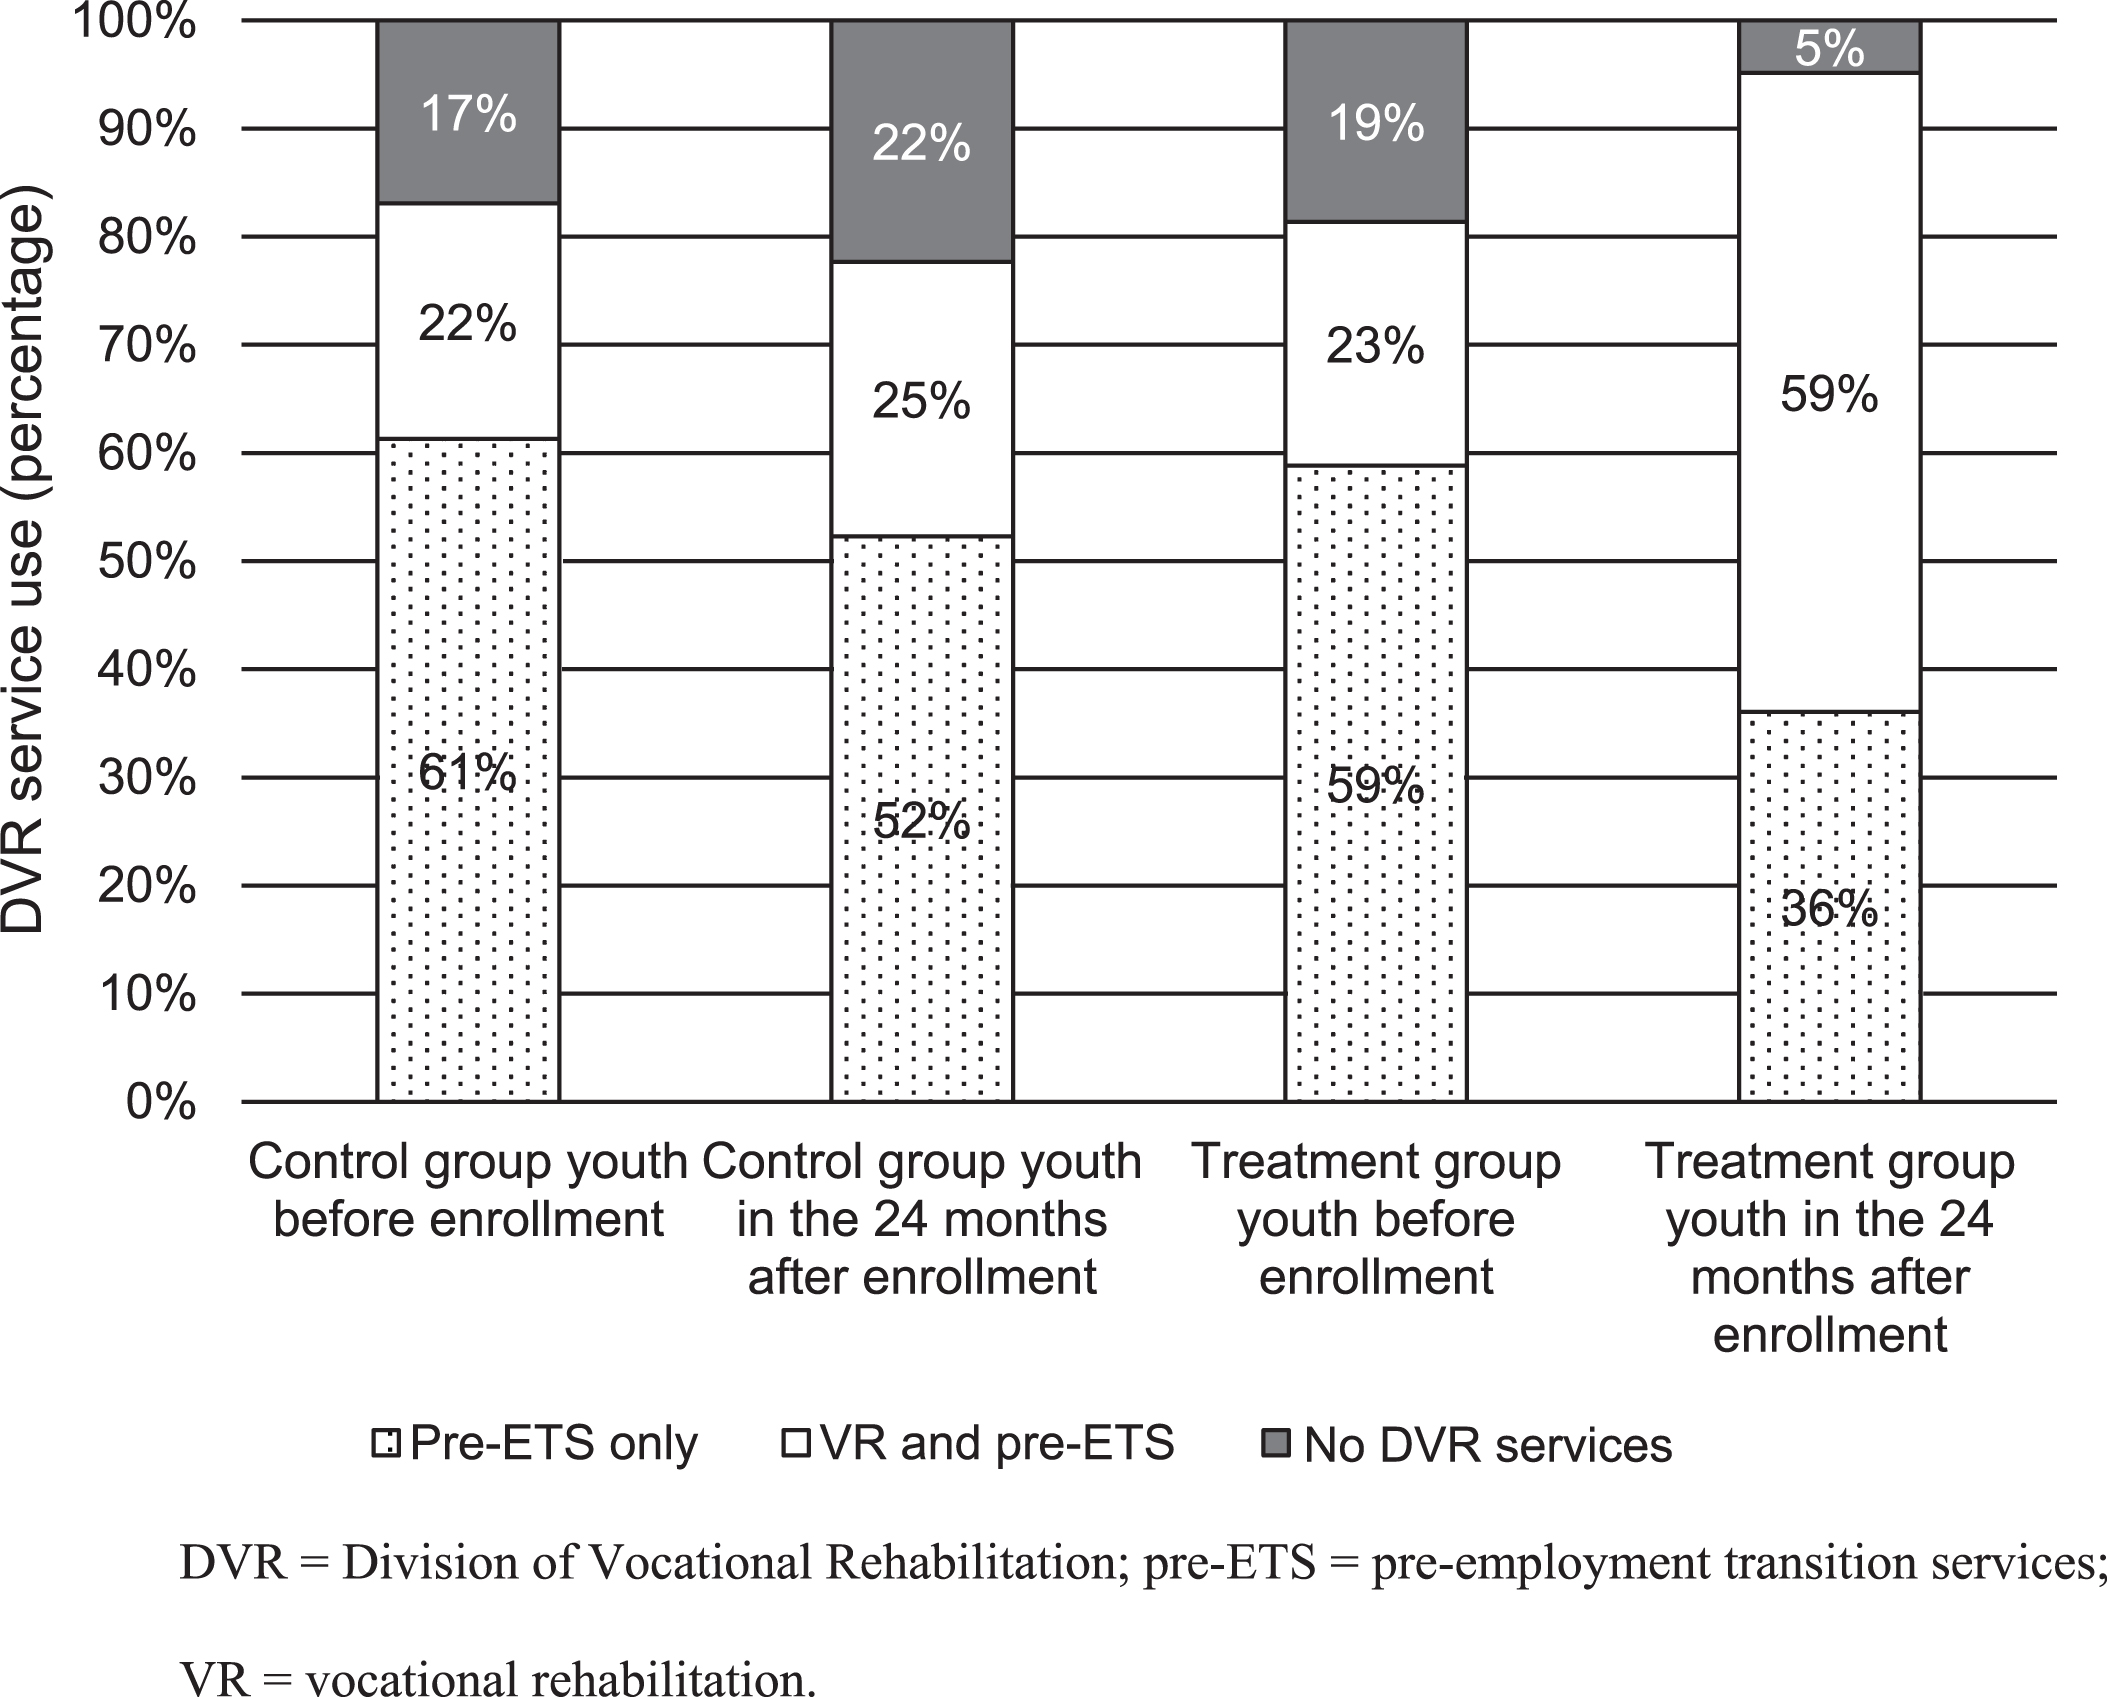 DVR involvement at enrollment and during the 24 months after enrollment. This figure shows the proportion of treatment (N = 413) and control (N = 390) youth according to their DVR service involvement at enrollment and 24 months after enrollment.